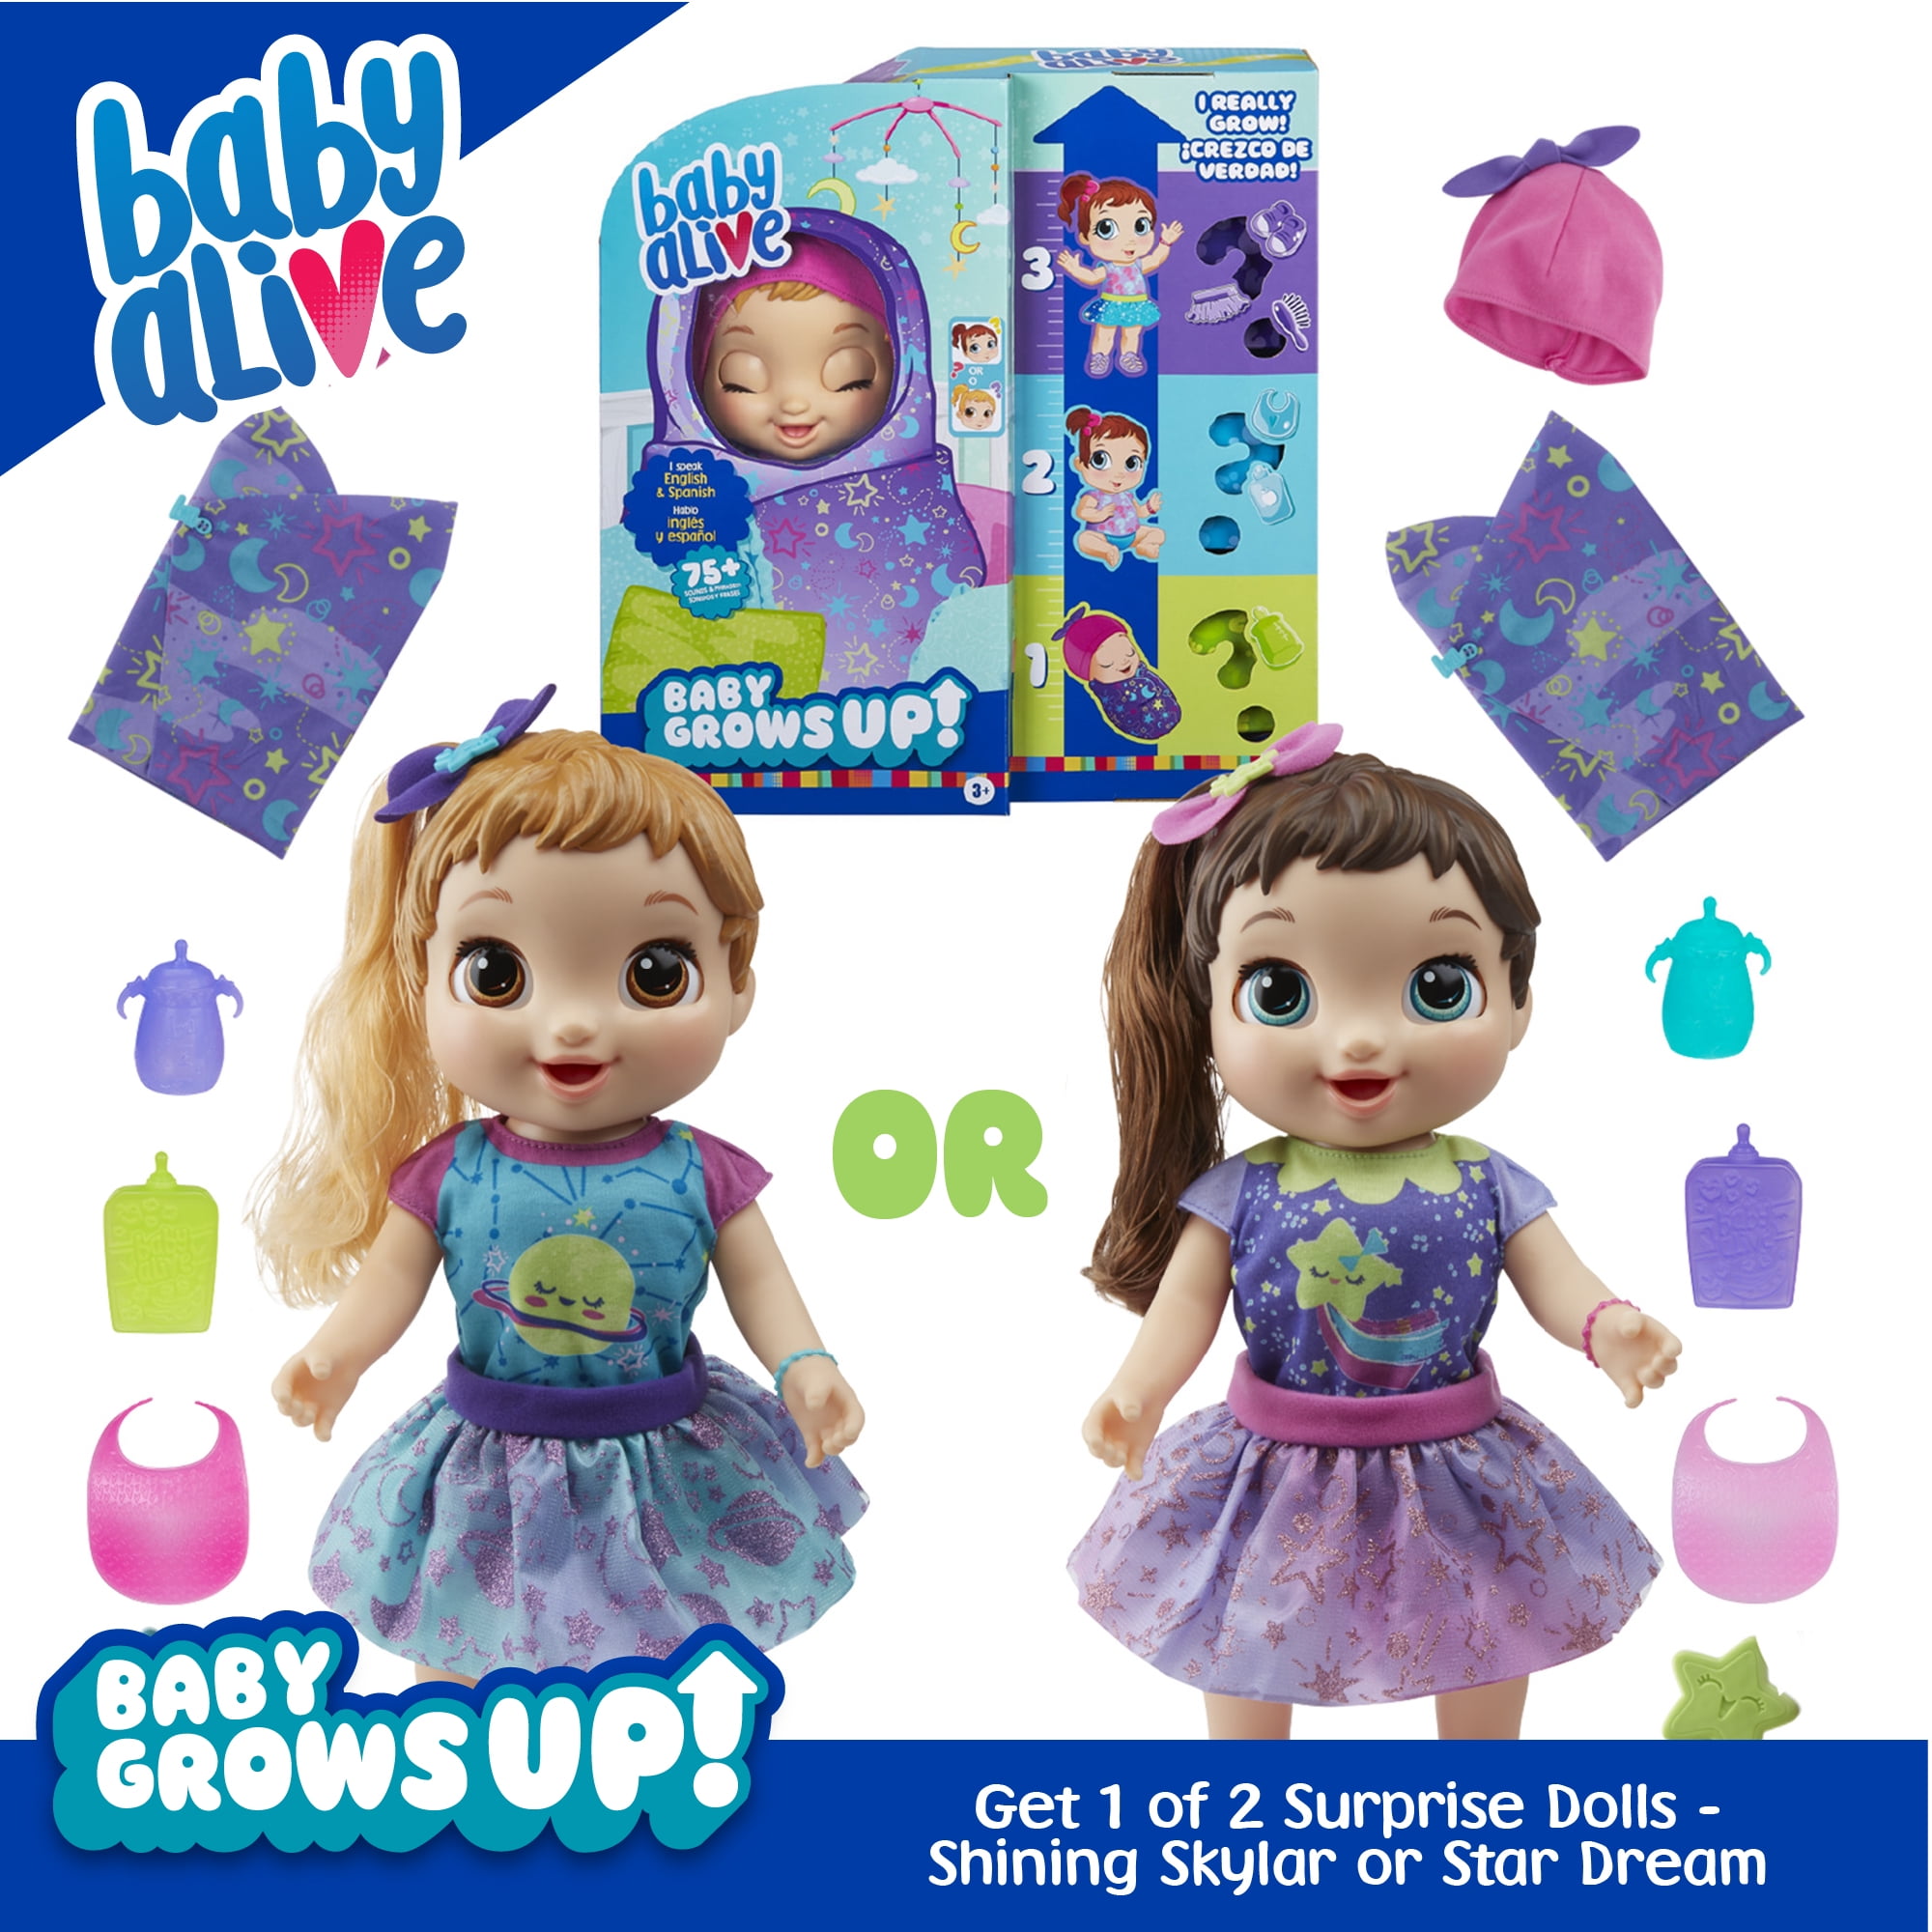 Baby Alive Baby Grows Up (Sweet) - Get 